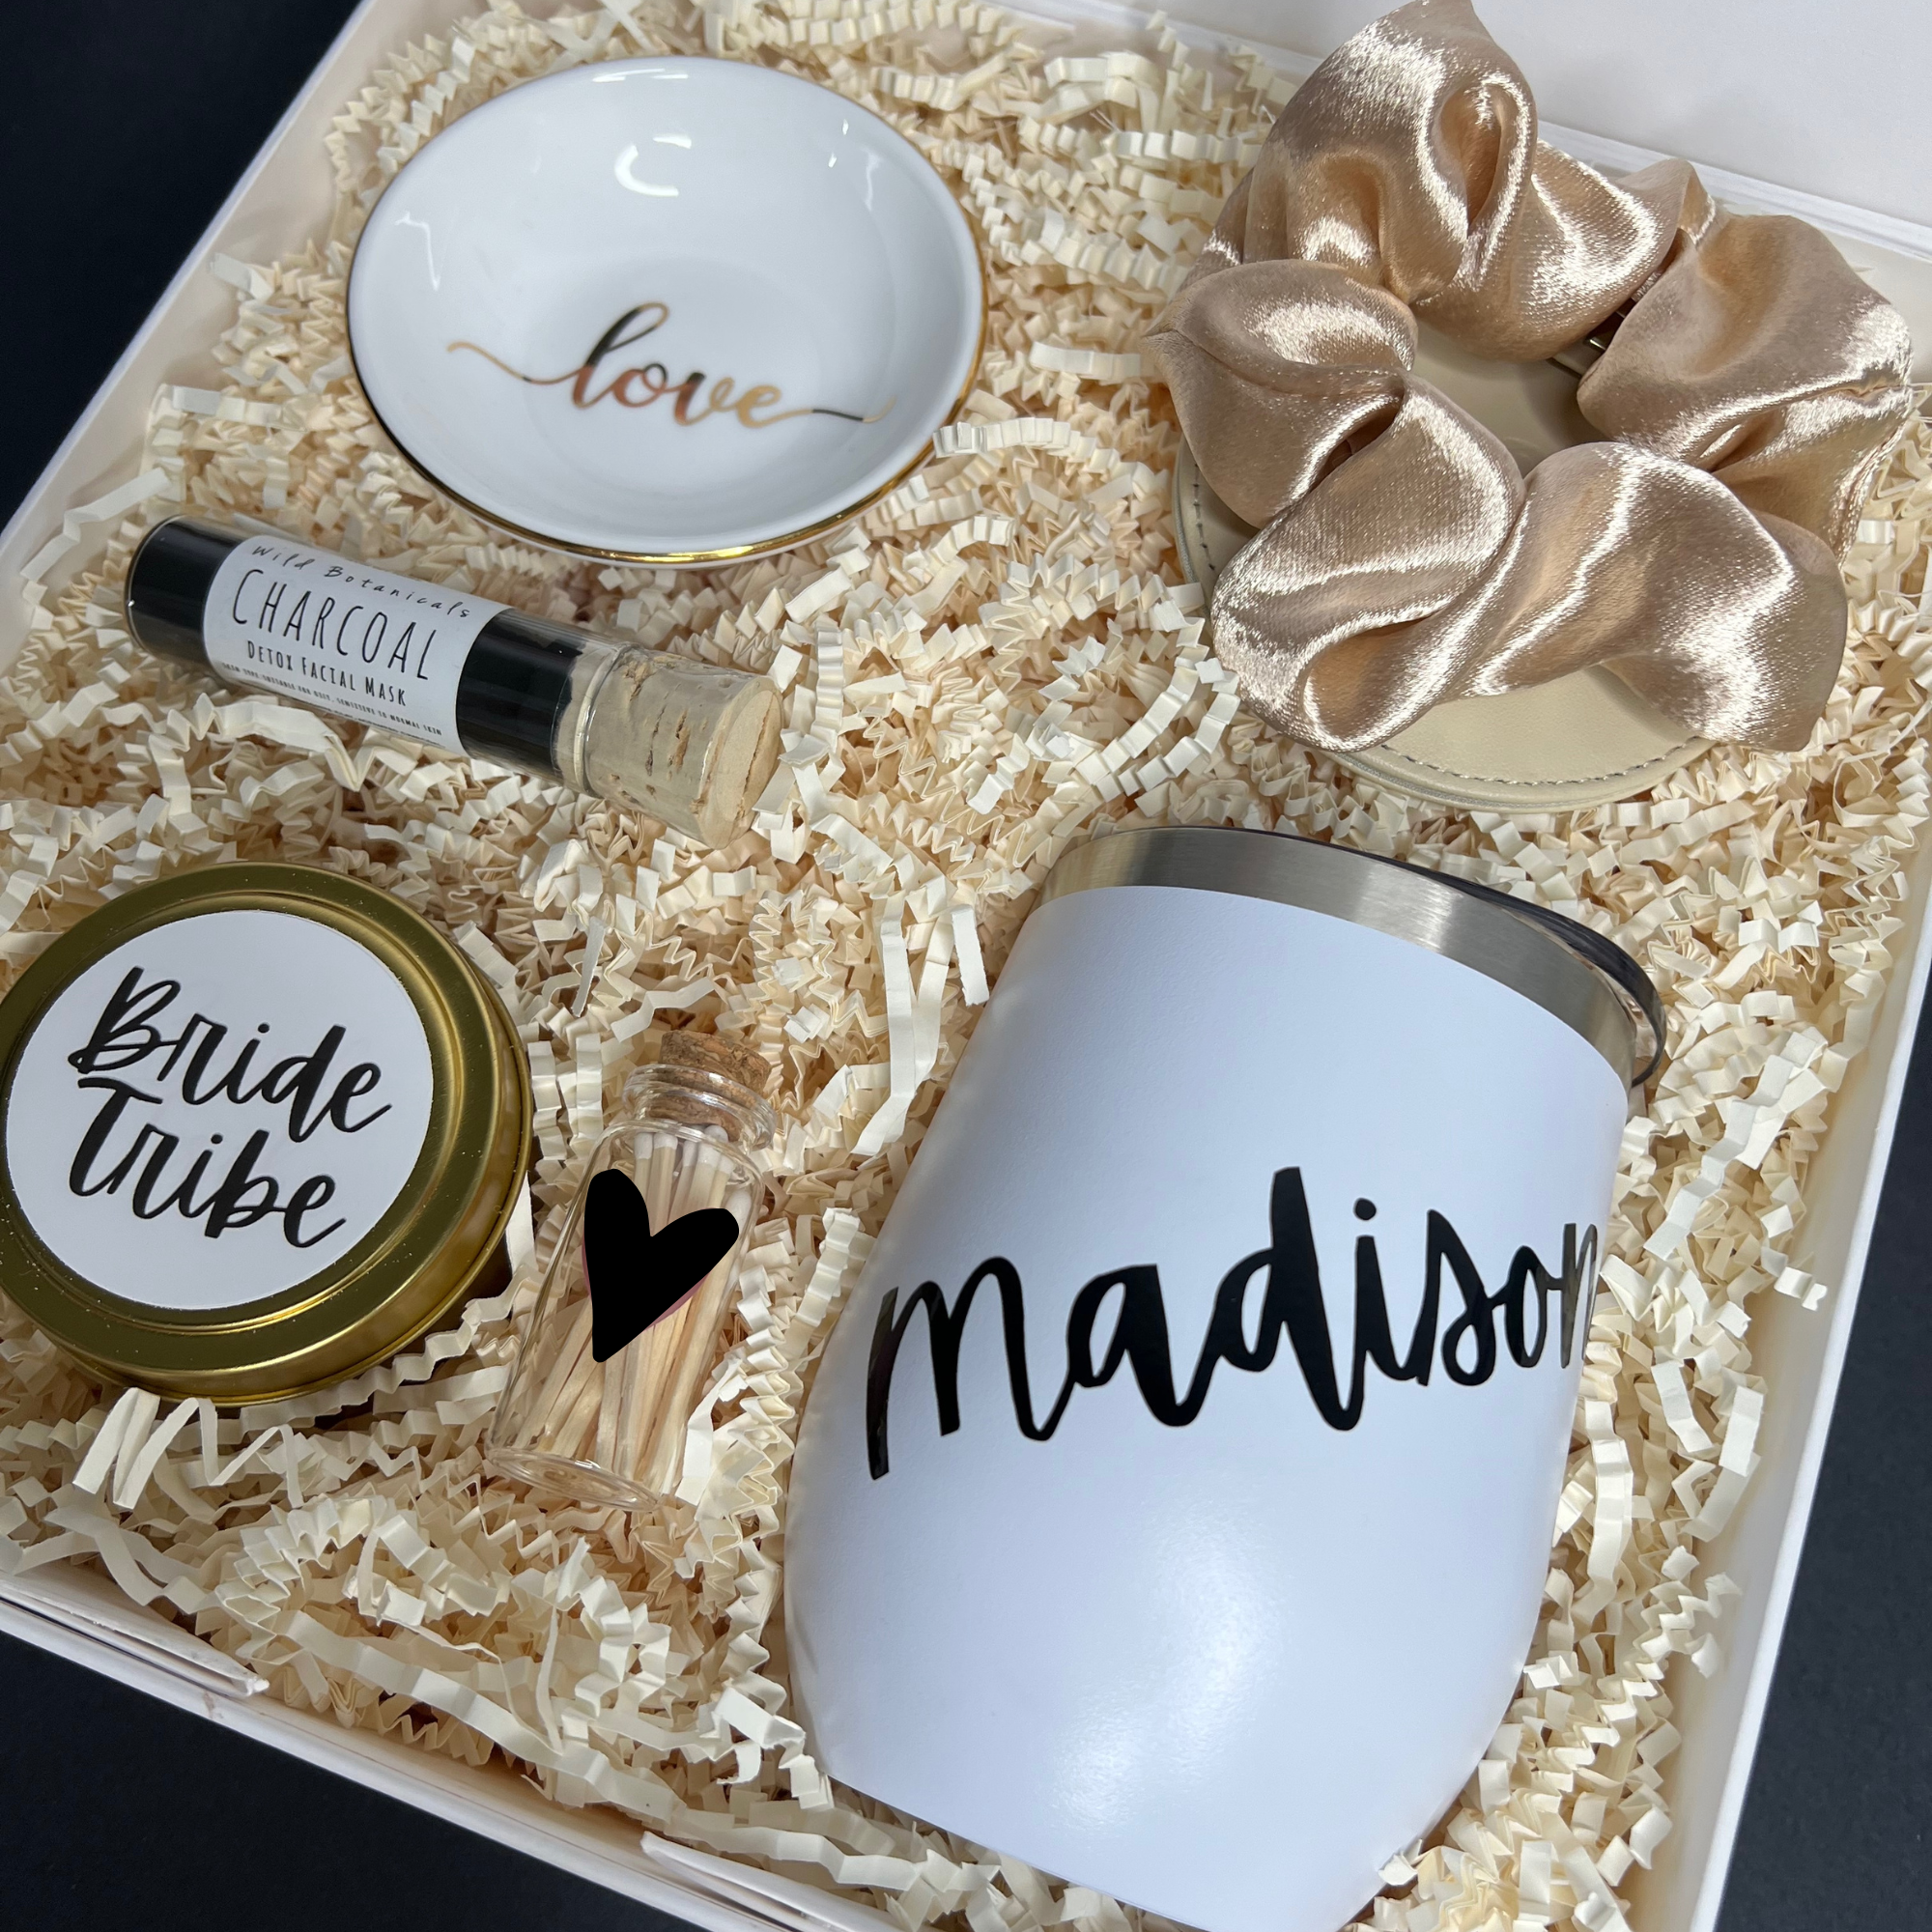 Western Bridesmaid Gifts--Proposal/Thank You – The Saddle Shoppe